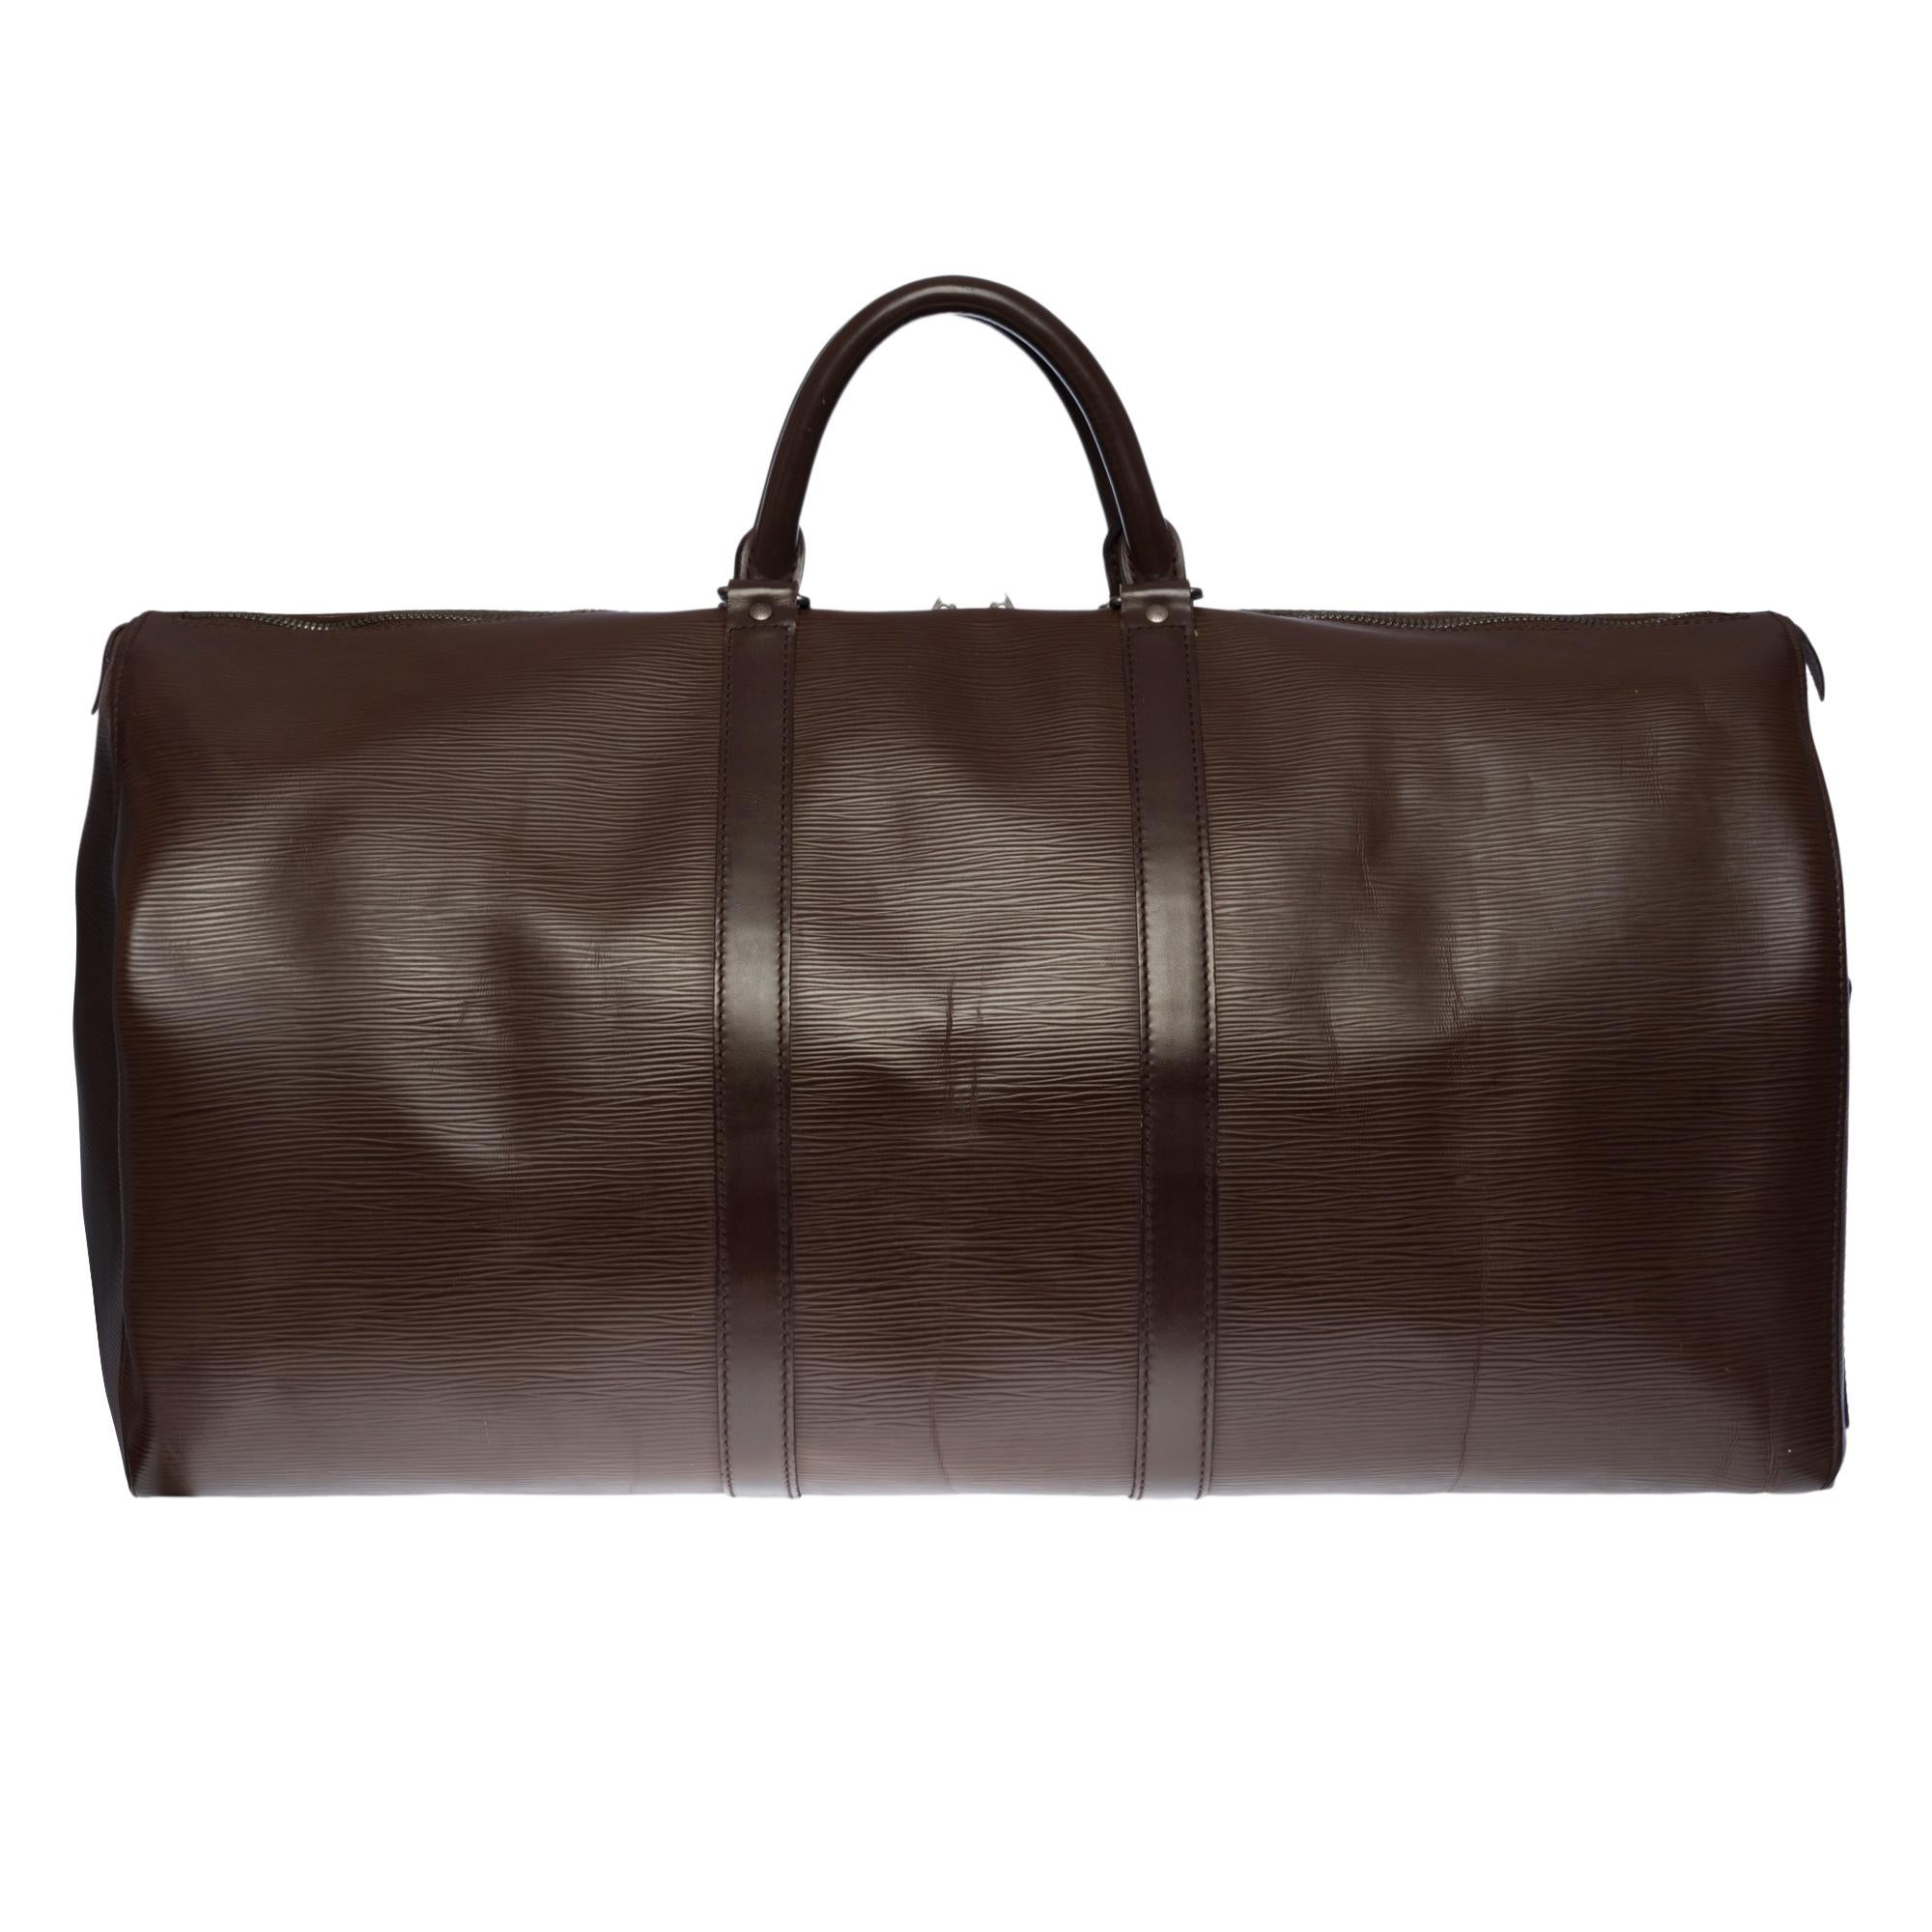 Rare and very Chic Louis Vuitton Keepall 55 cm travel bag in cocoa épi leather, matte silver metal hardware, double handle in cocoa leather for a hand wear

Double zipper
Inner lining in brown suede
Signature: 